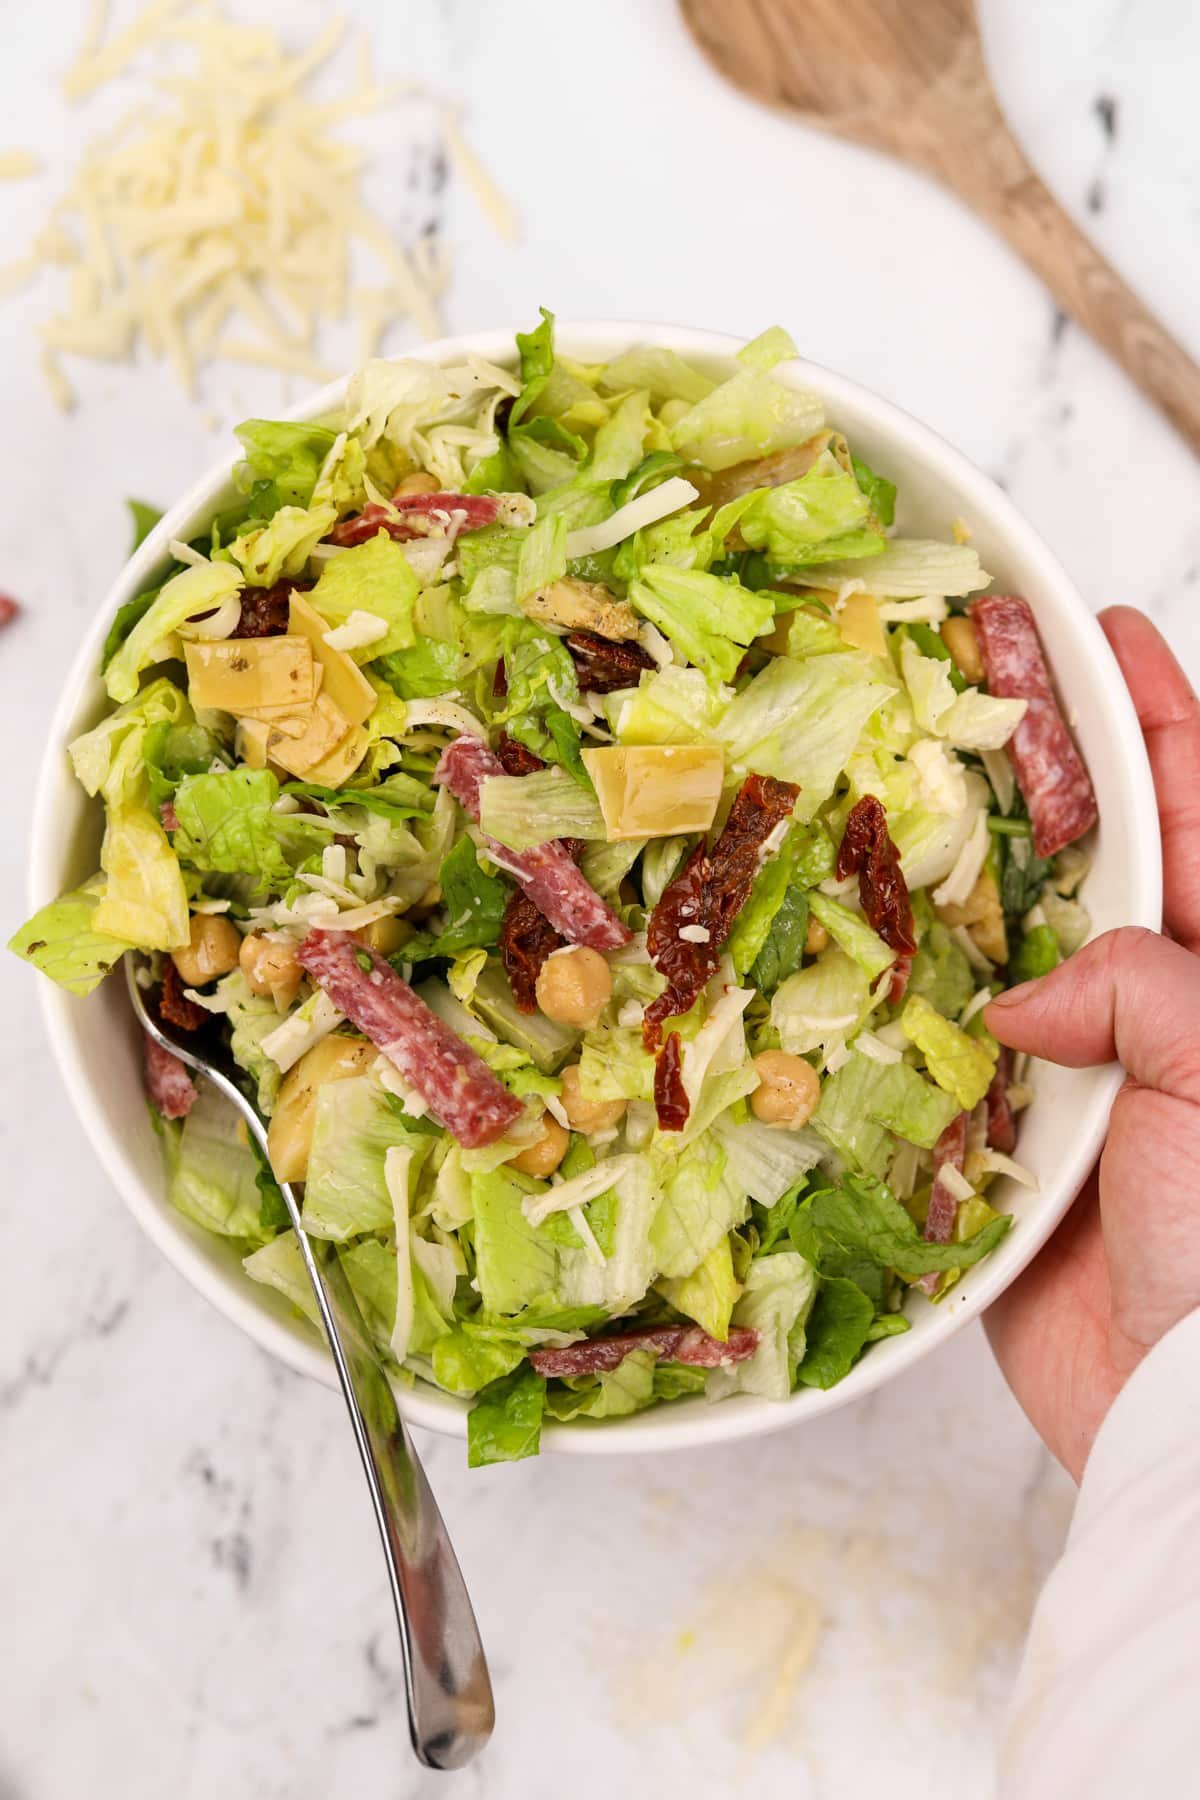 Holding a bowl of chopped salad, featuring chopped salami and mozzarella.